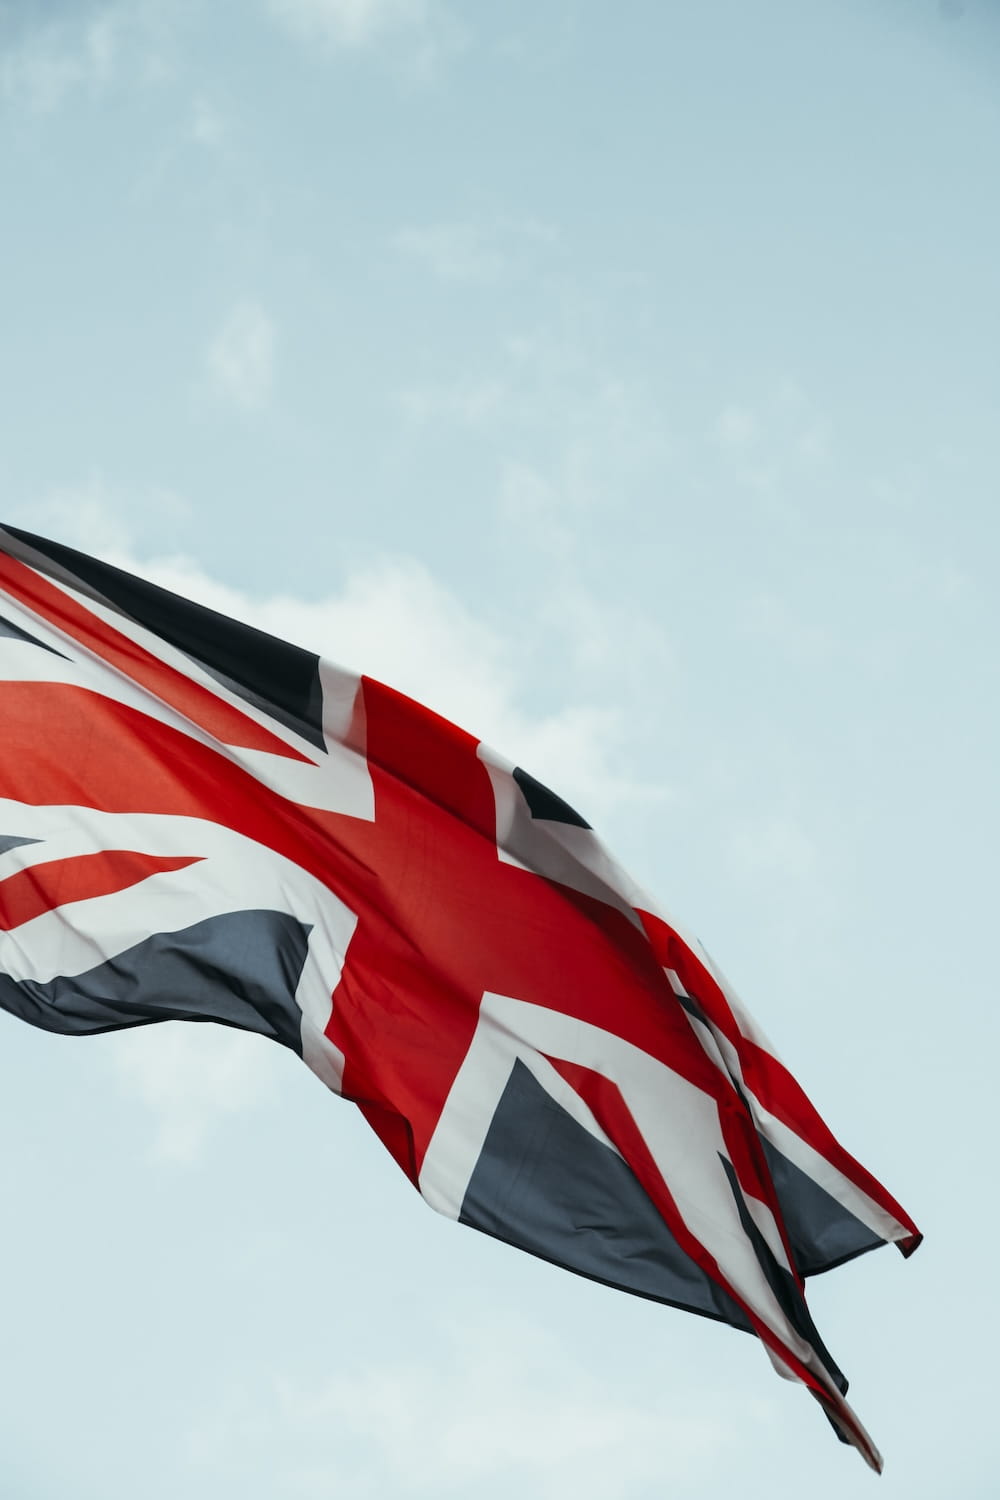 British flag, imported products from the UK and more